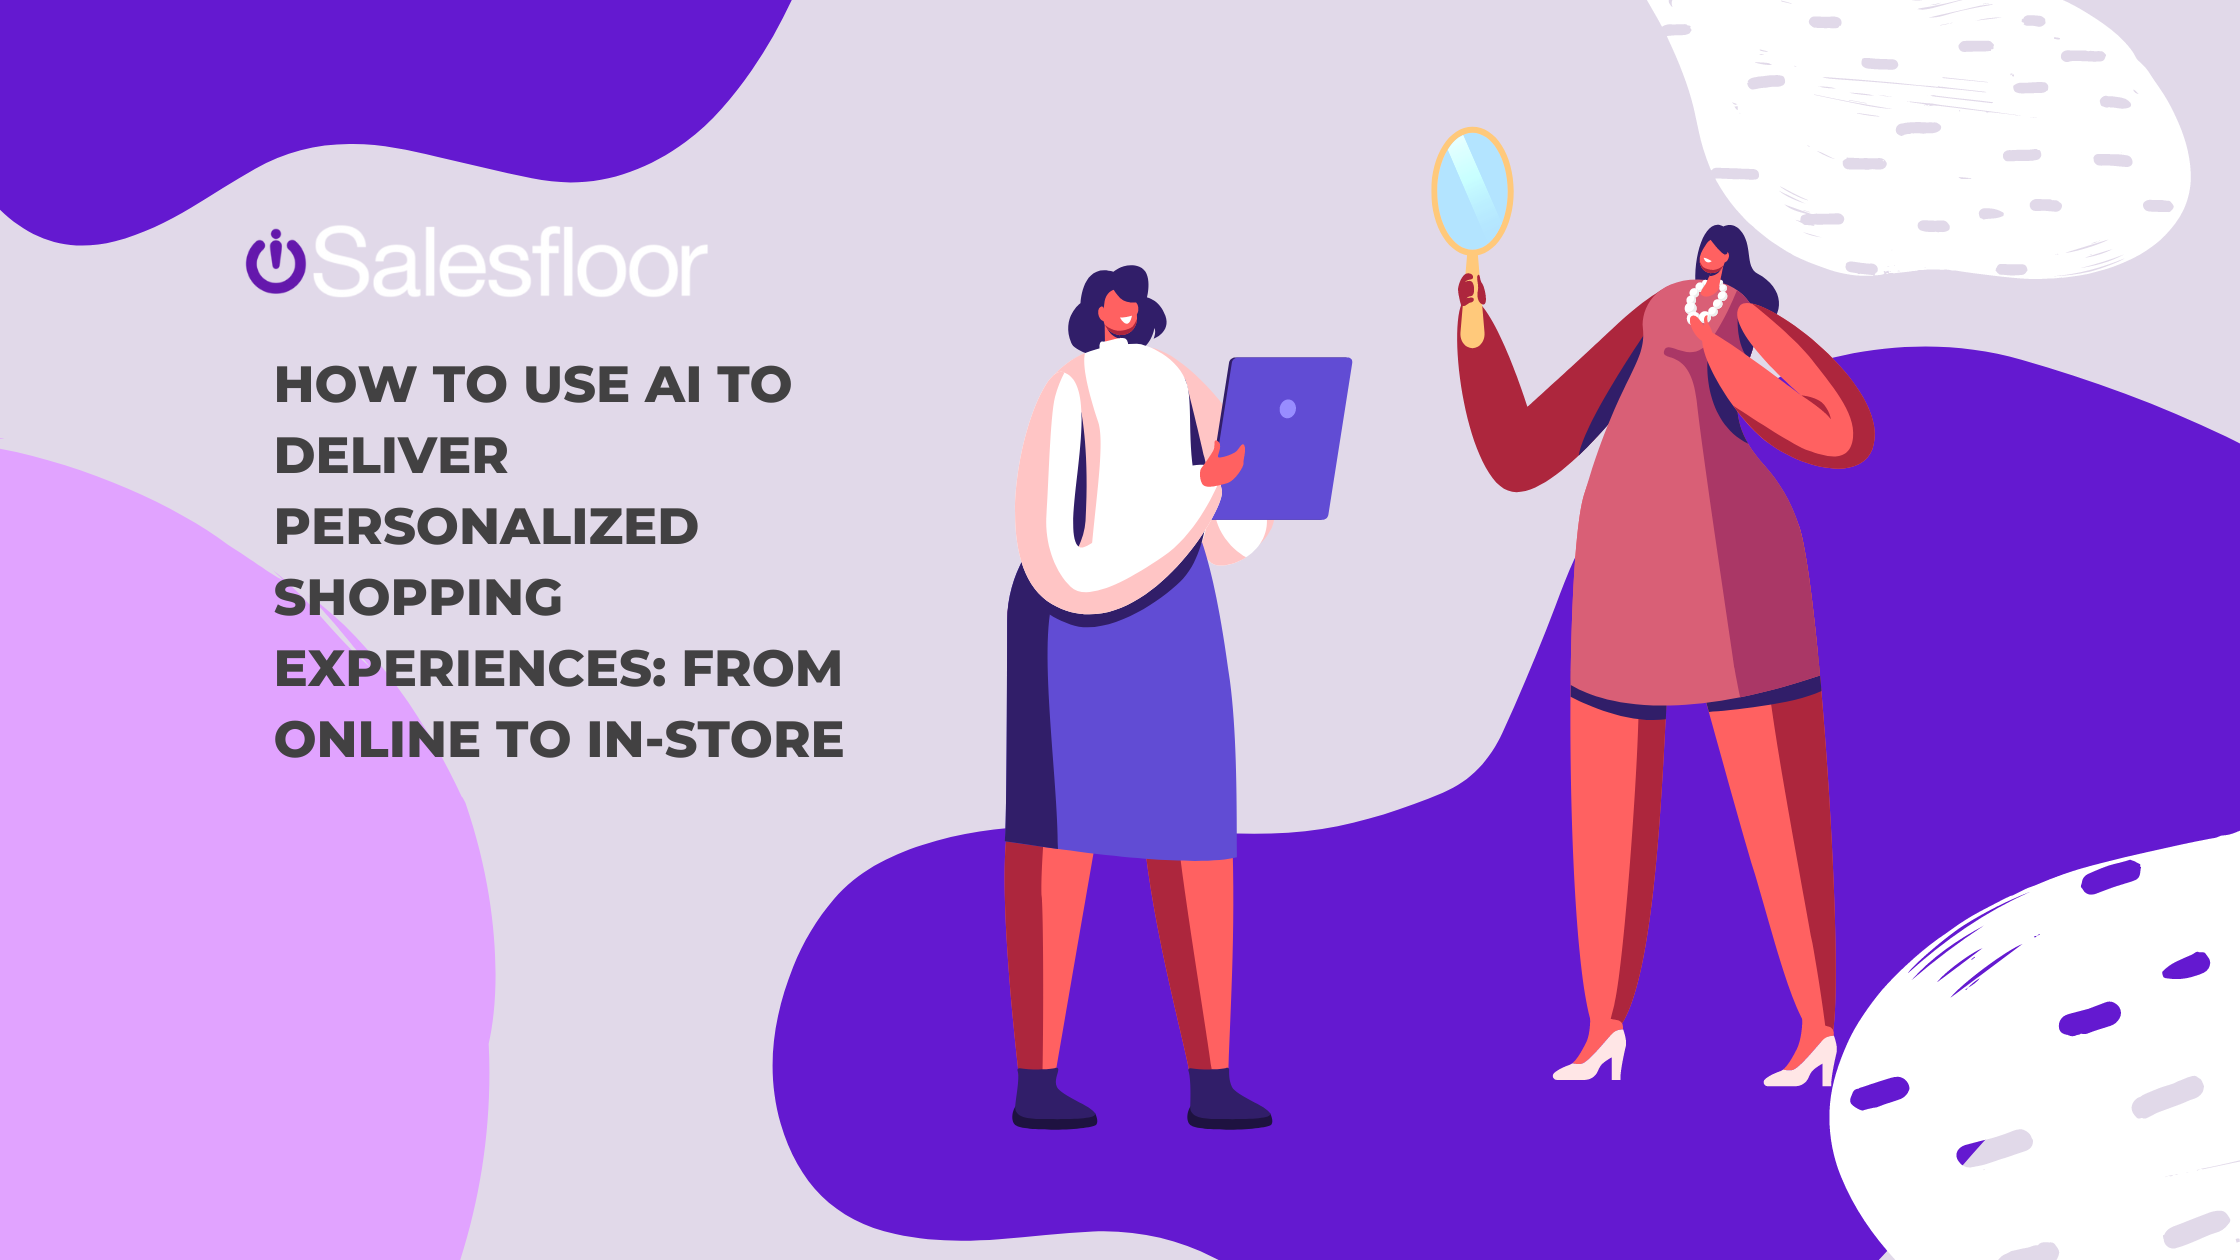 How to Use AI to Deliver Personalized Shopping Experiences: From Online to In-Store